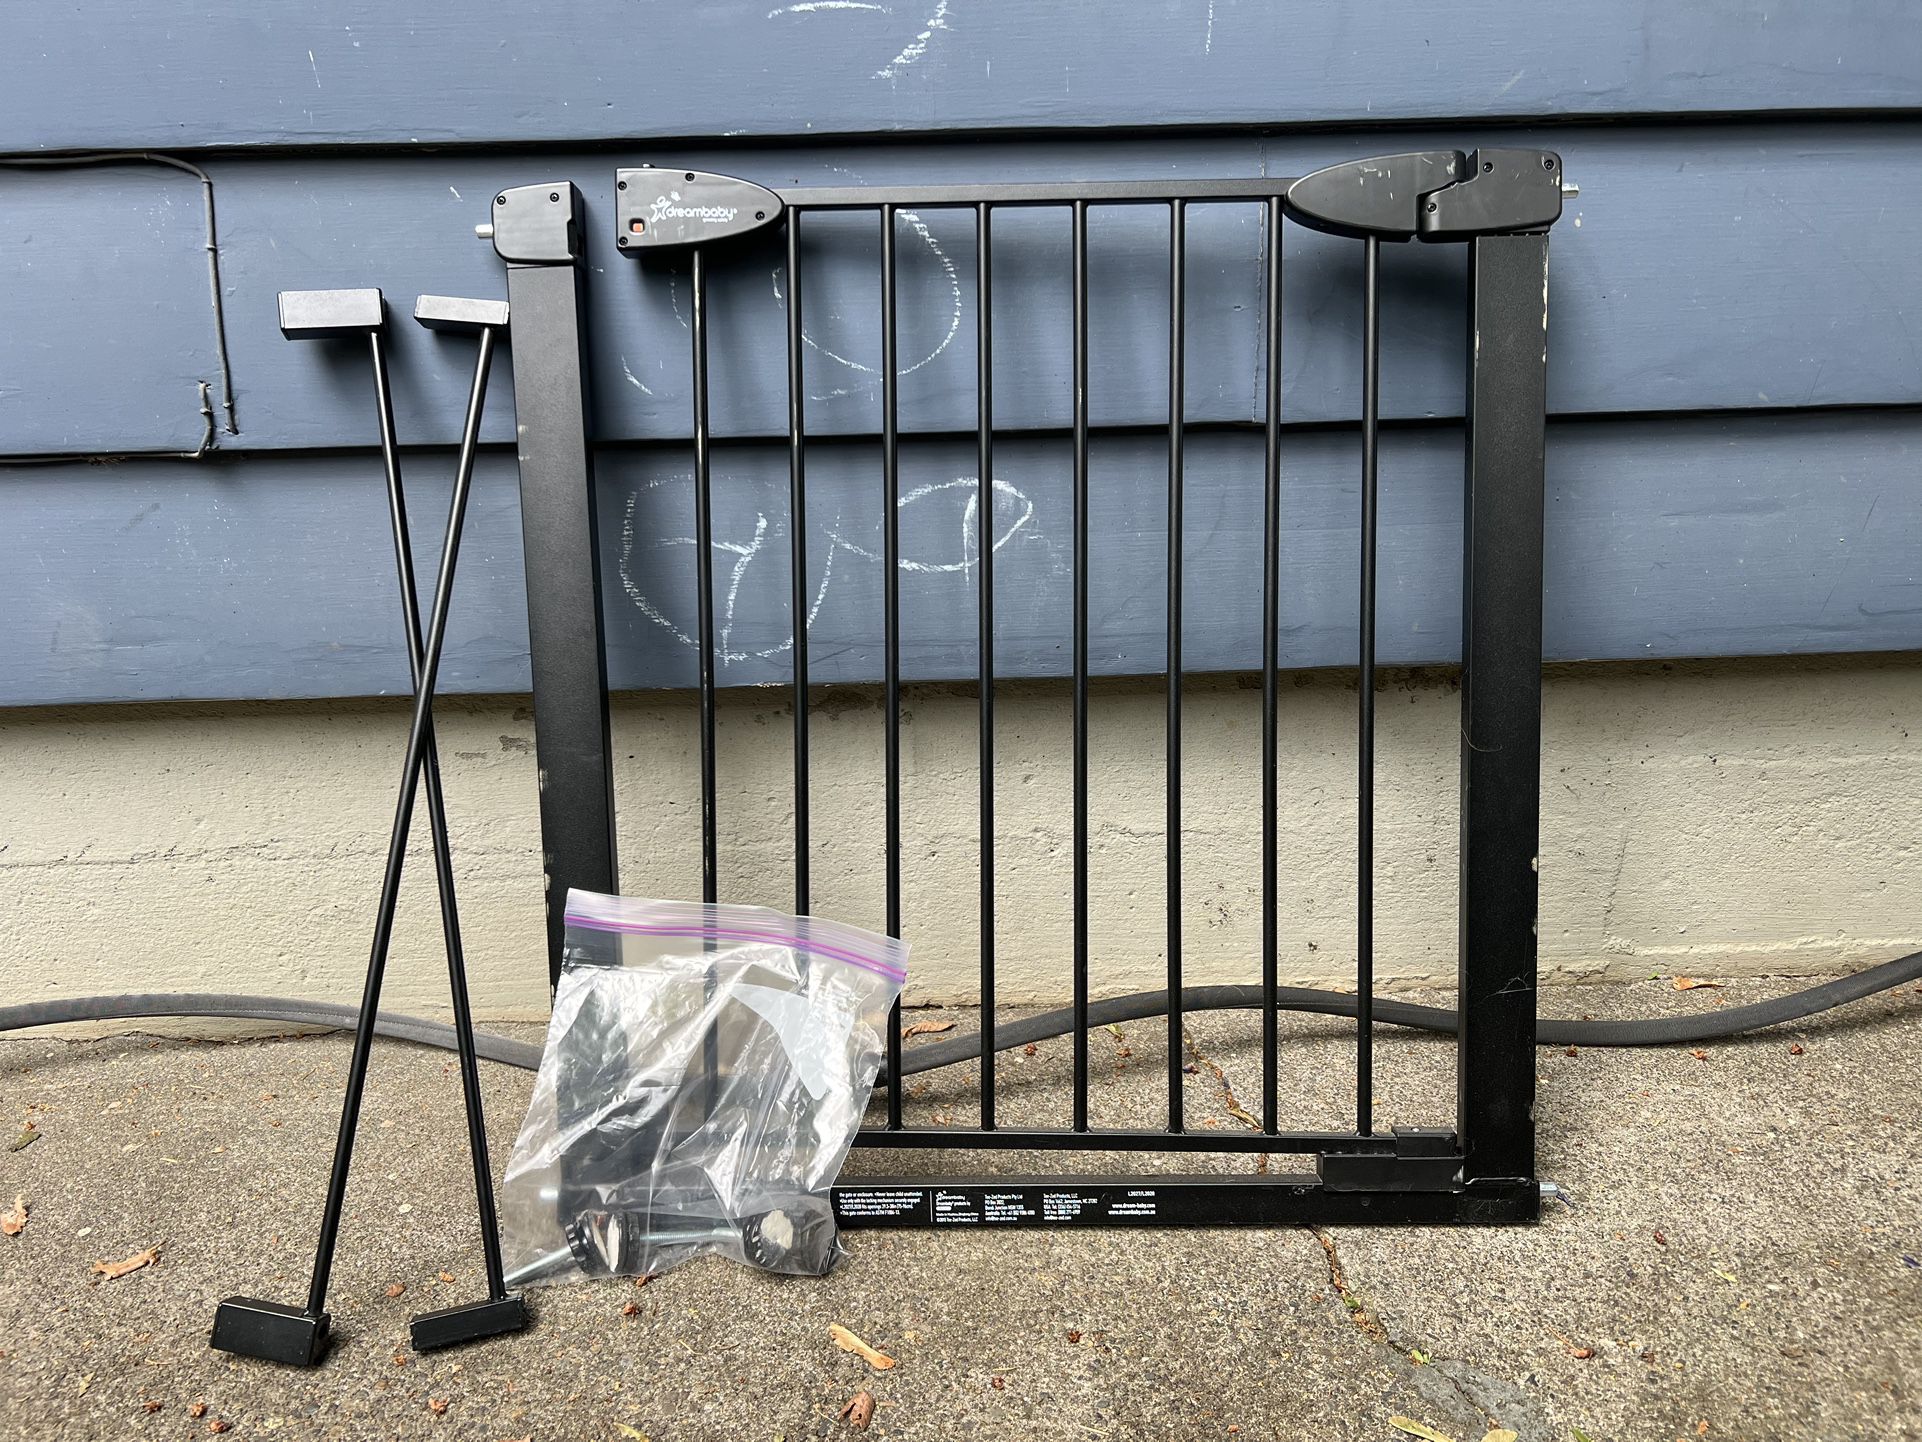 29.5-38in Auto Close Metal Baby Gate w/ EZY-Check® Indicator